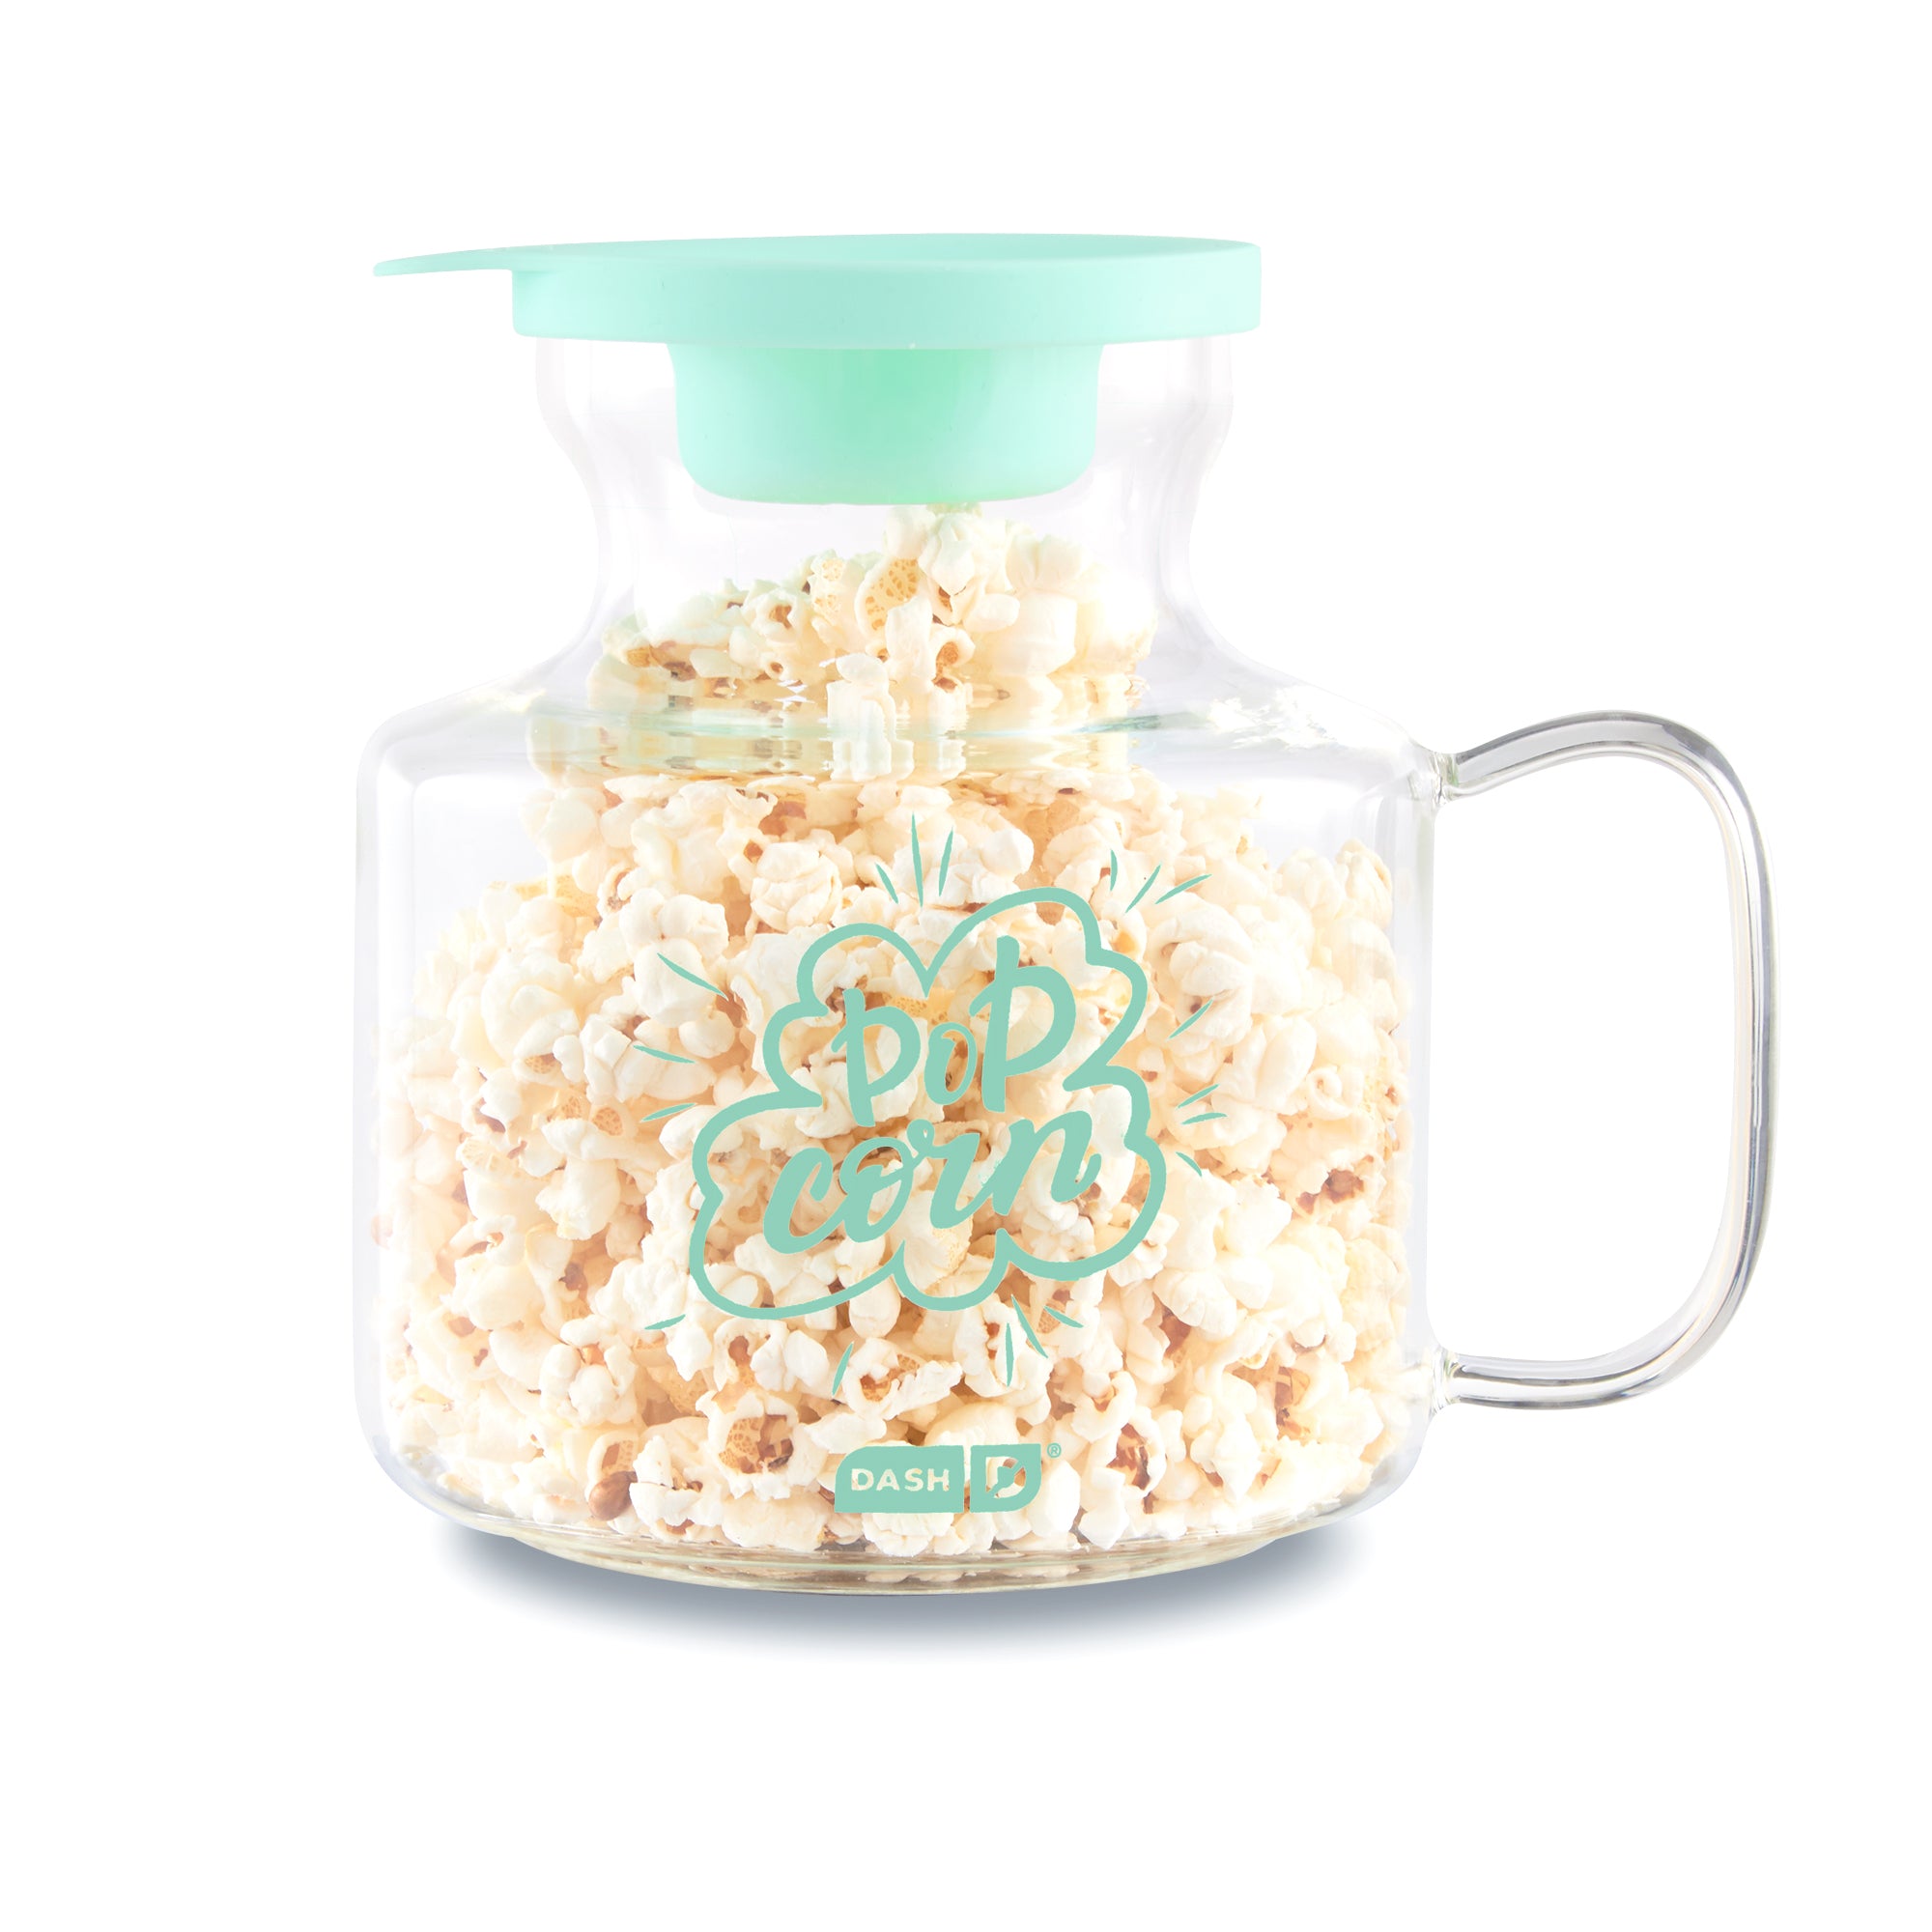 Microwave popcorn gets a healthy spin with this glass popper and